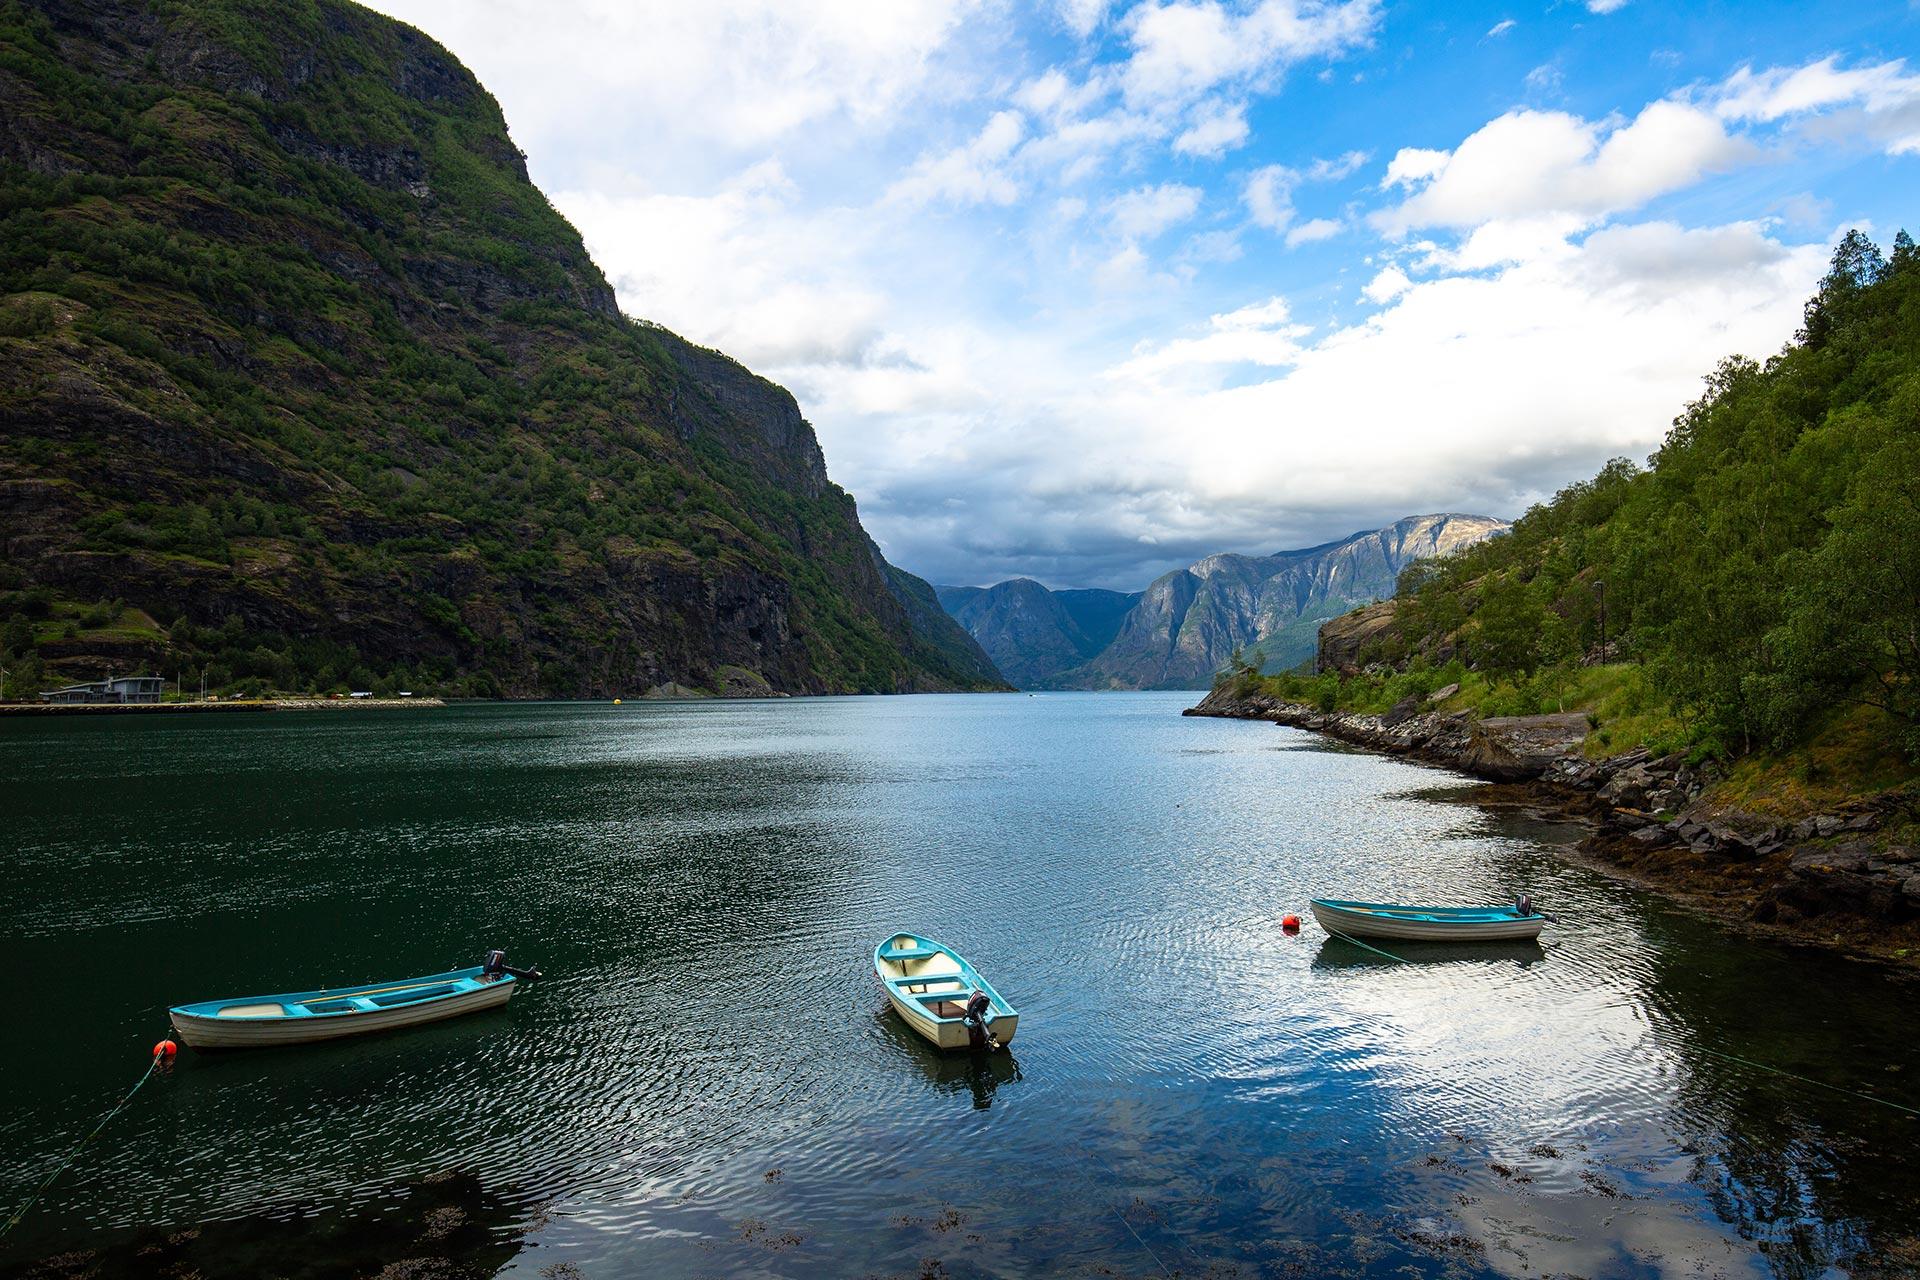 Take a Boat Through the Fjords